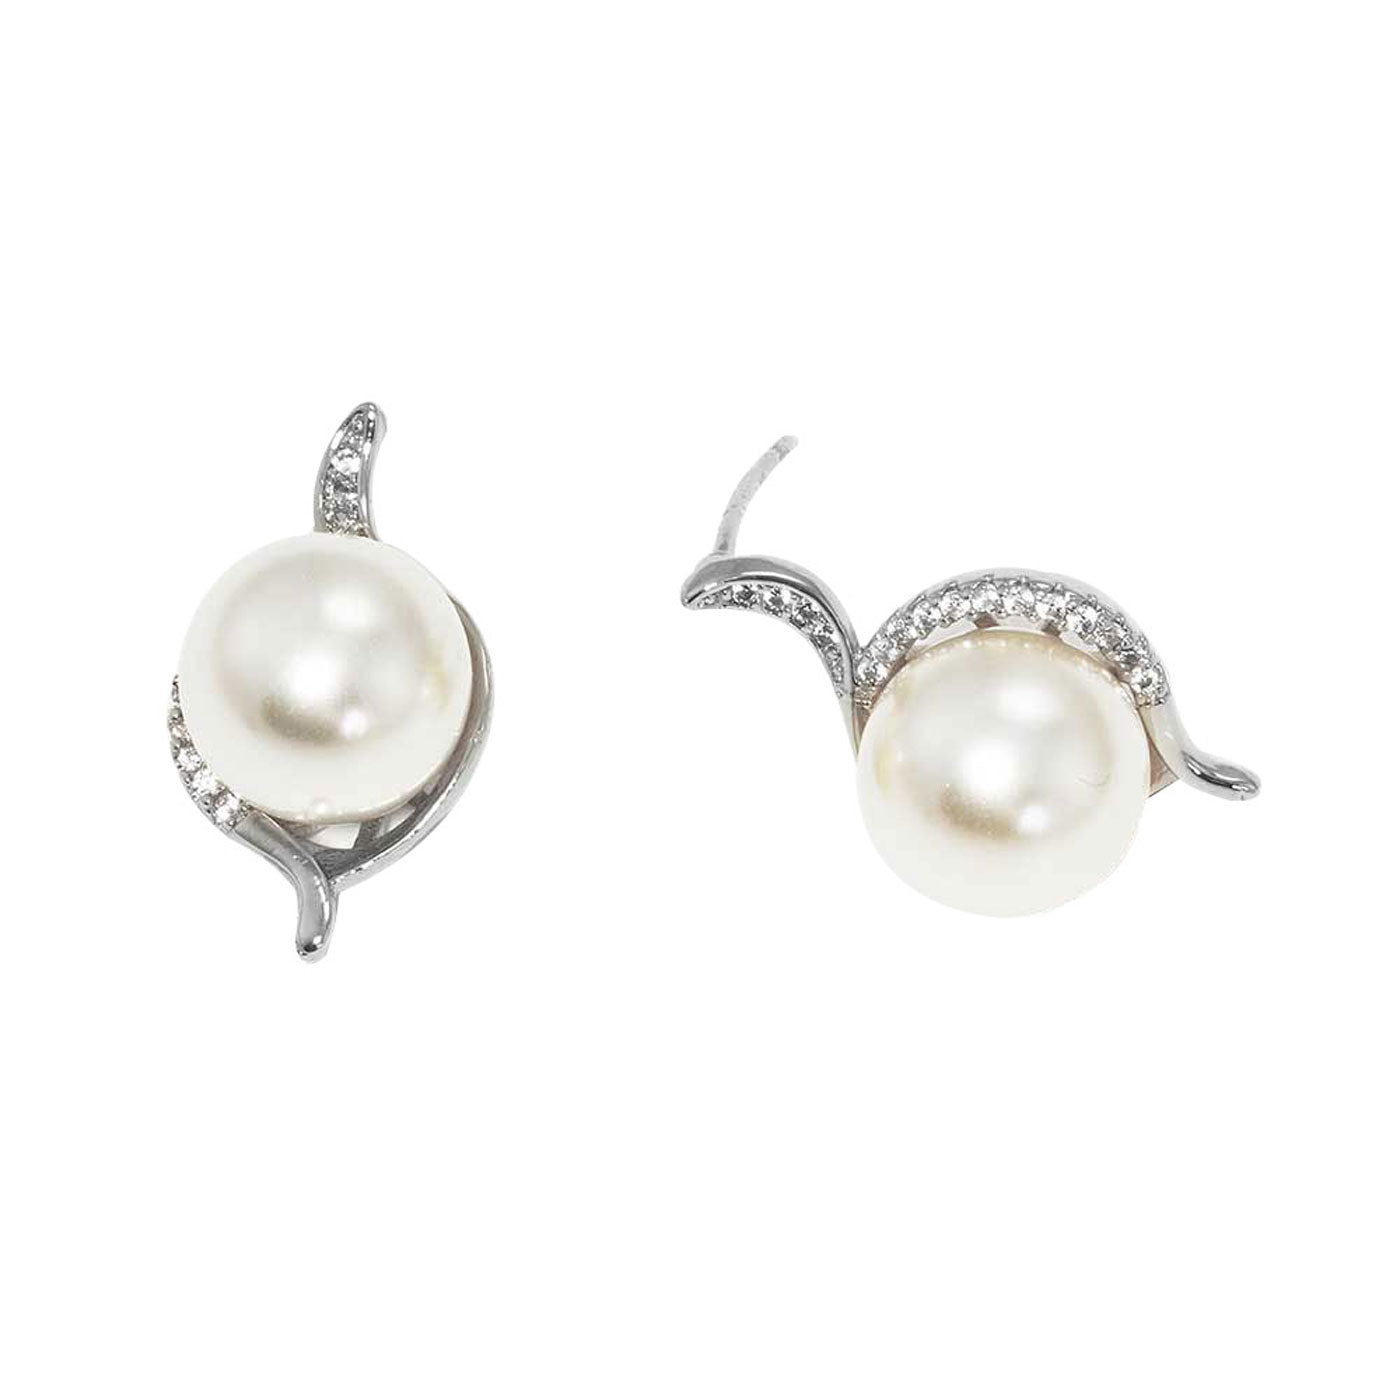 Rhodium White Gold Dipped CZ Pearl Stud Earrings, ideal for parties, weddings, graduation, prom, quinceanera, holidays, pair these stud back earrings, add just the right amount of shine and you’ve got a look that’s polished to perfection. These earrings pair perfectly with any ensemble from business casual, to night out on the town or a black tie party.